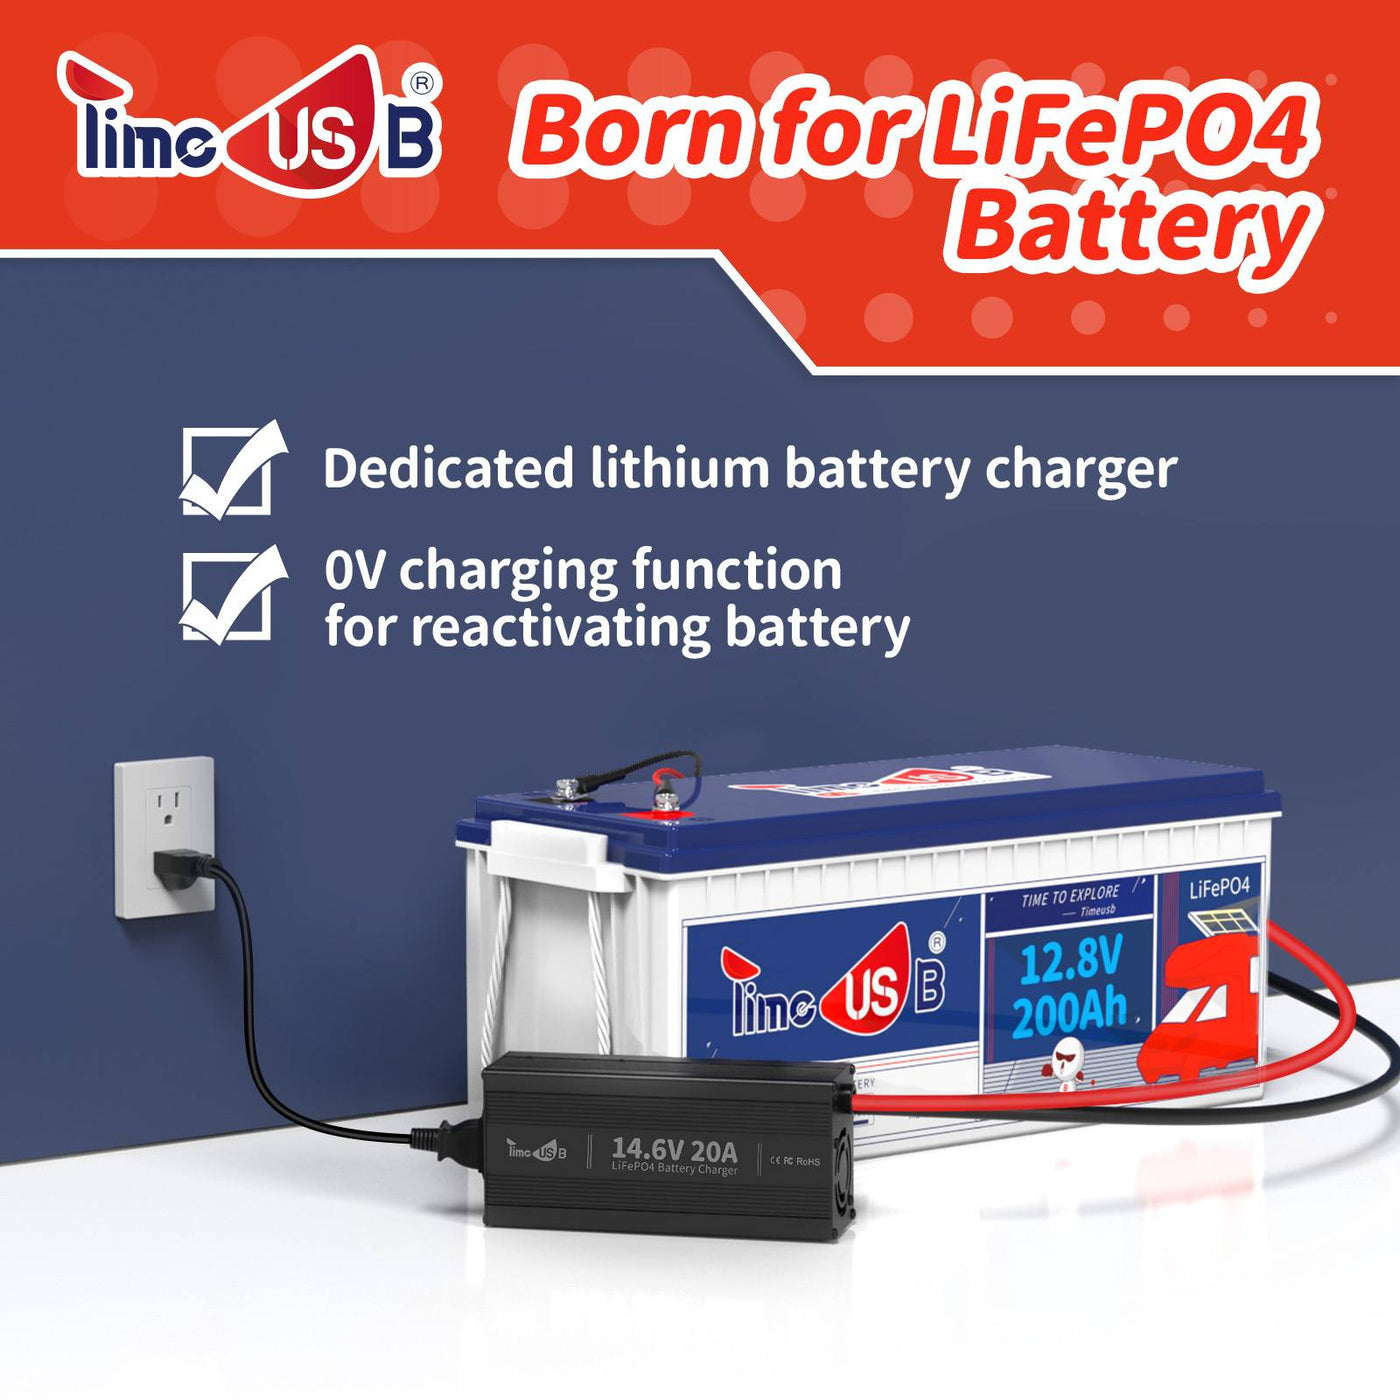 Timeusb 14.6V 20A Fast Charging LiFePO4 Battery Charger